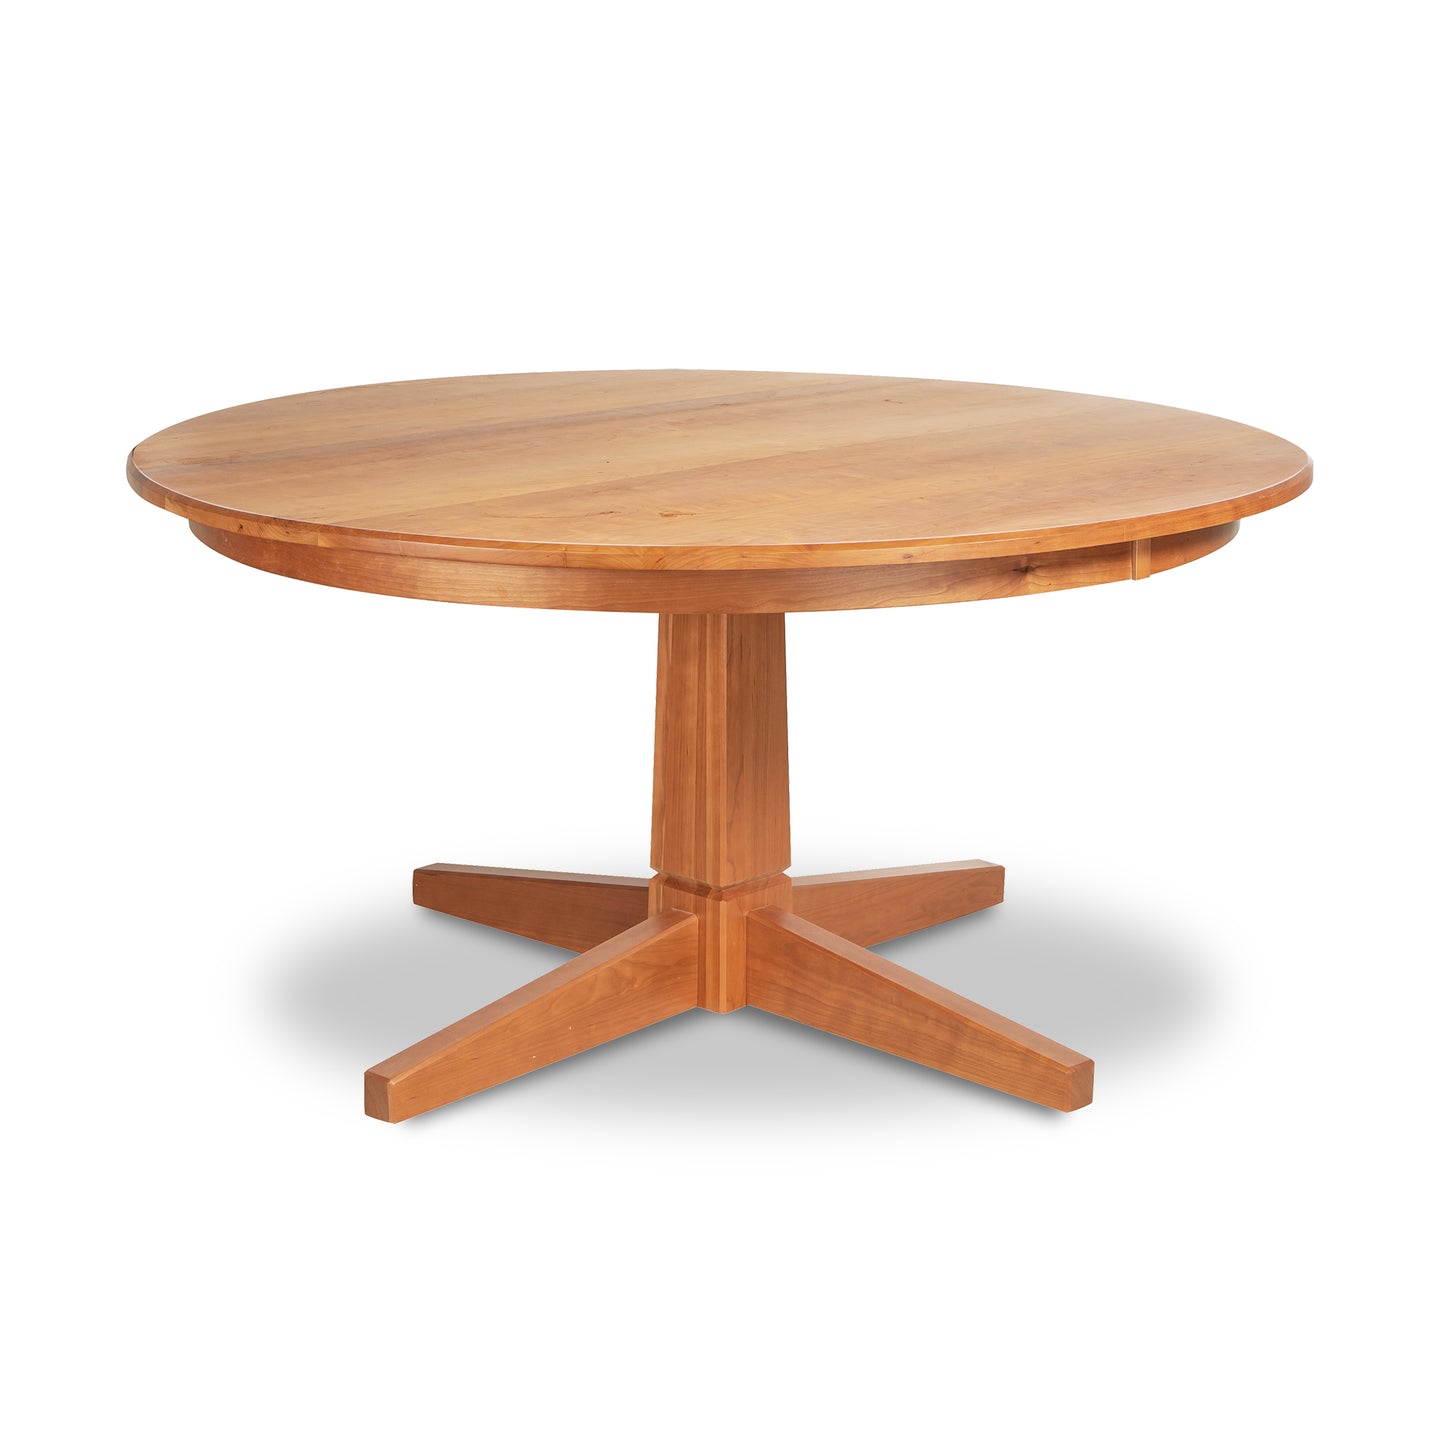 A round wooden table, the Natural Vermont Single Pedestal Round Solid Top Table by Lyndon Furniture, with four legs on a white background.